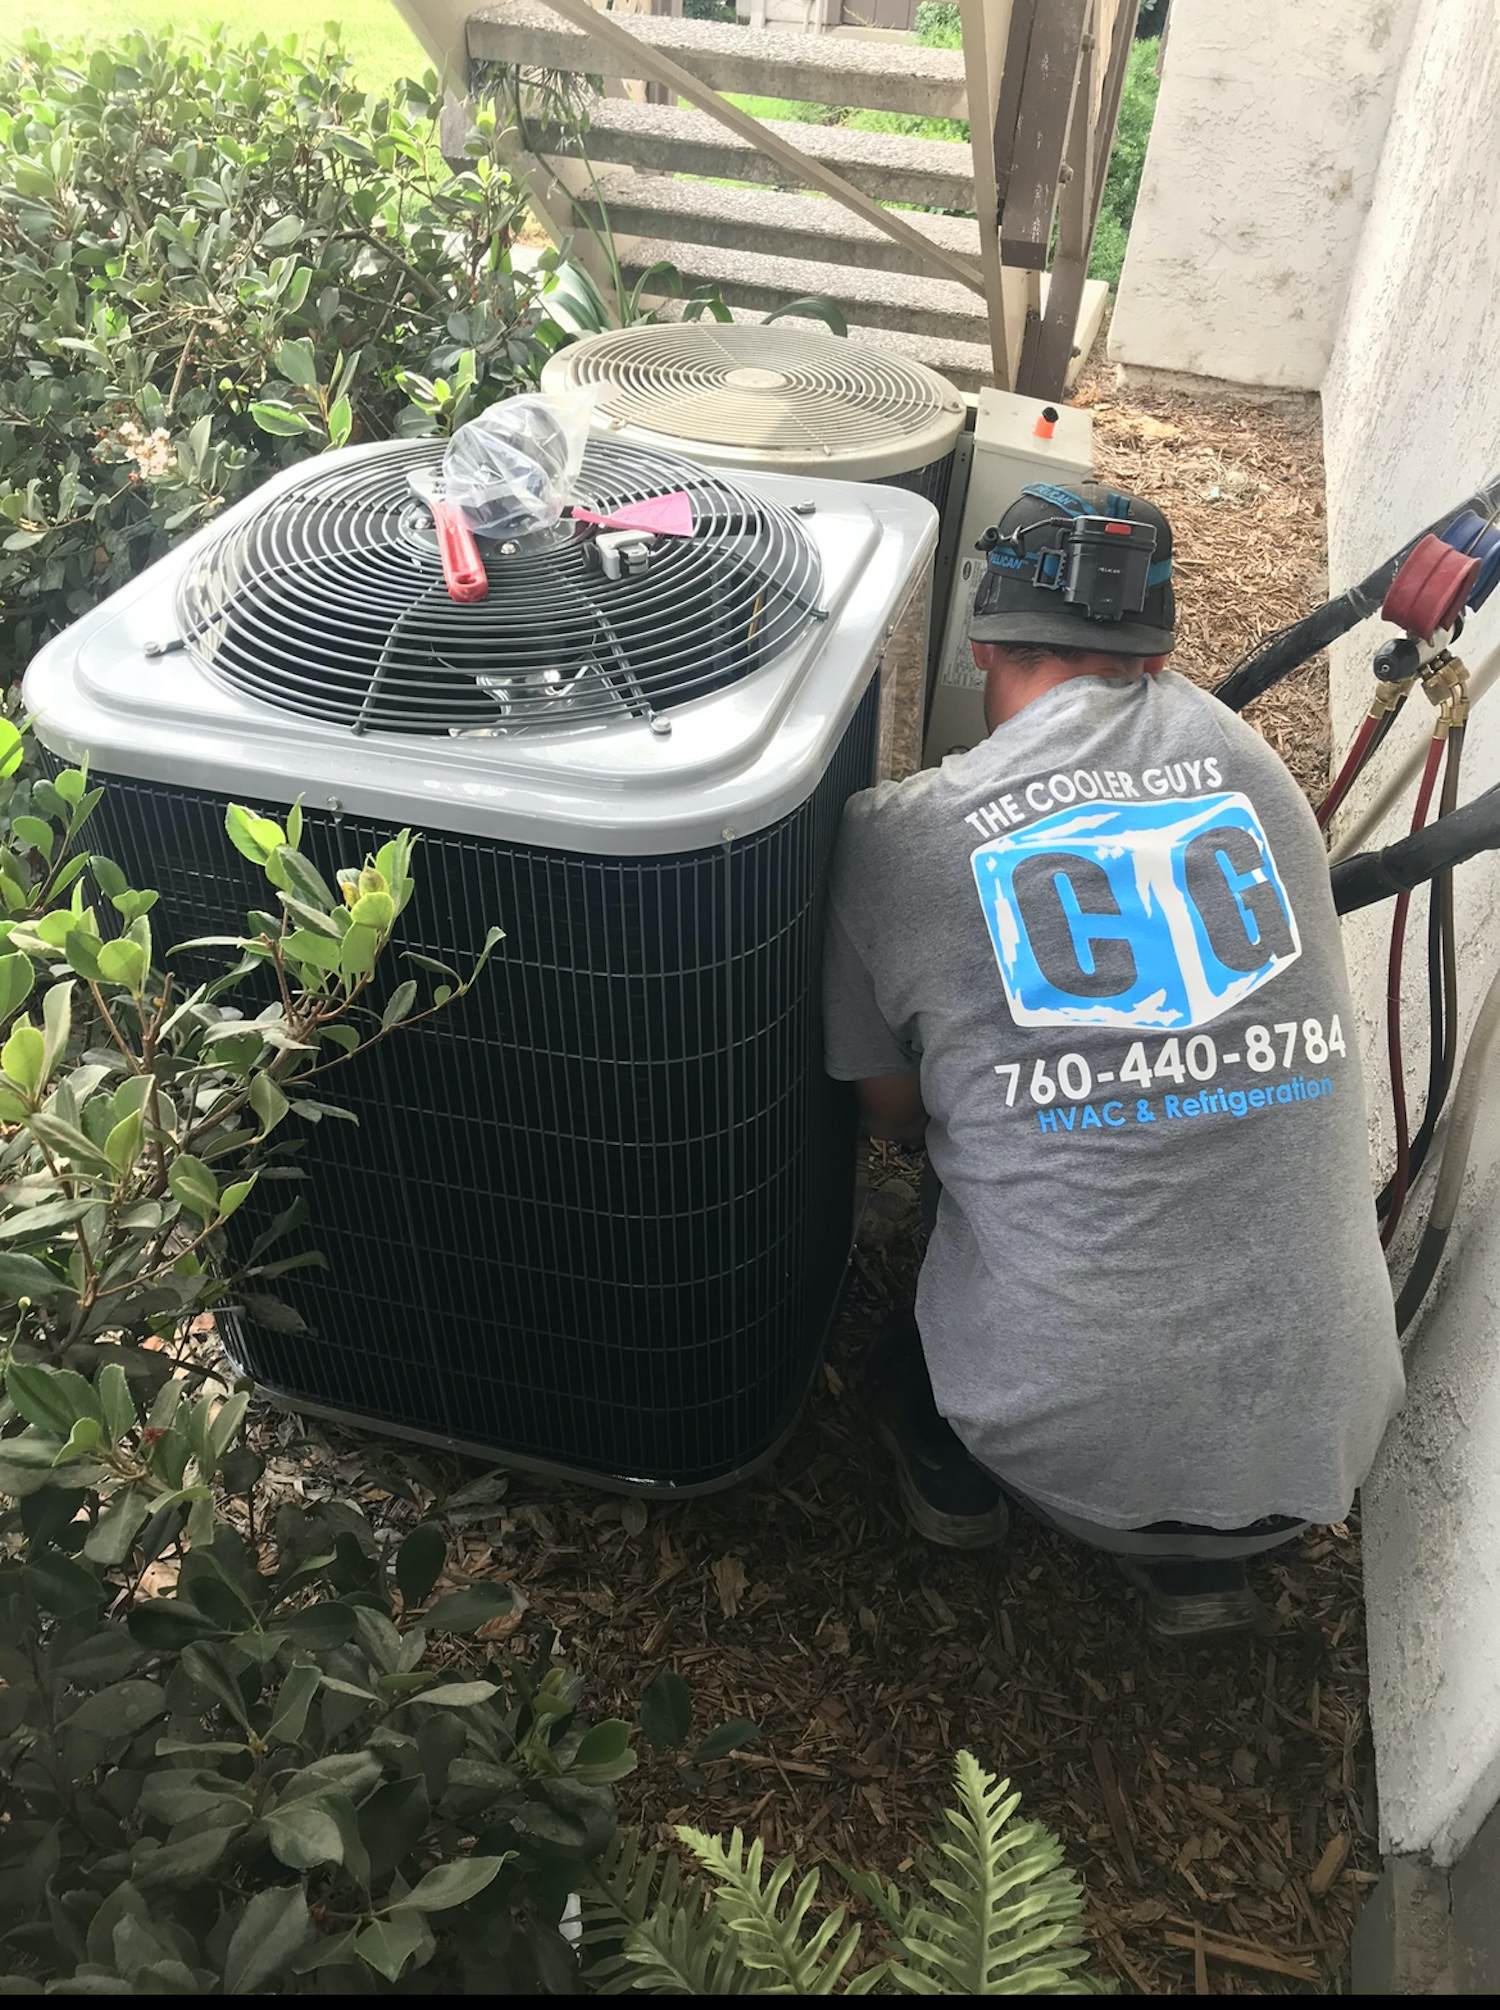 Air conditioning repair by the Cooler Guys